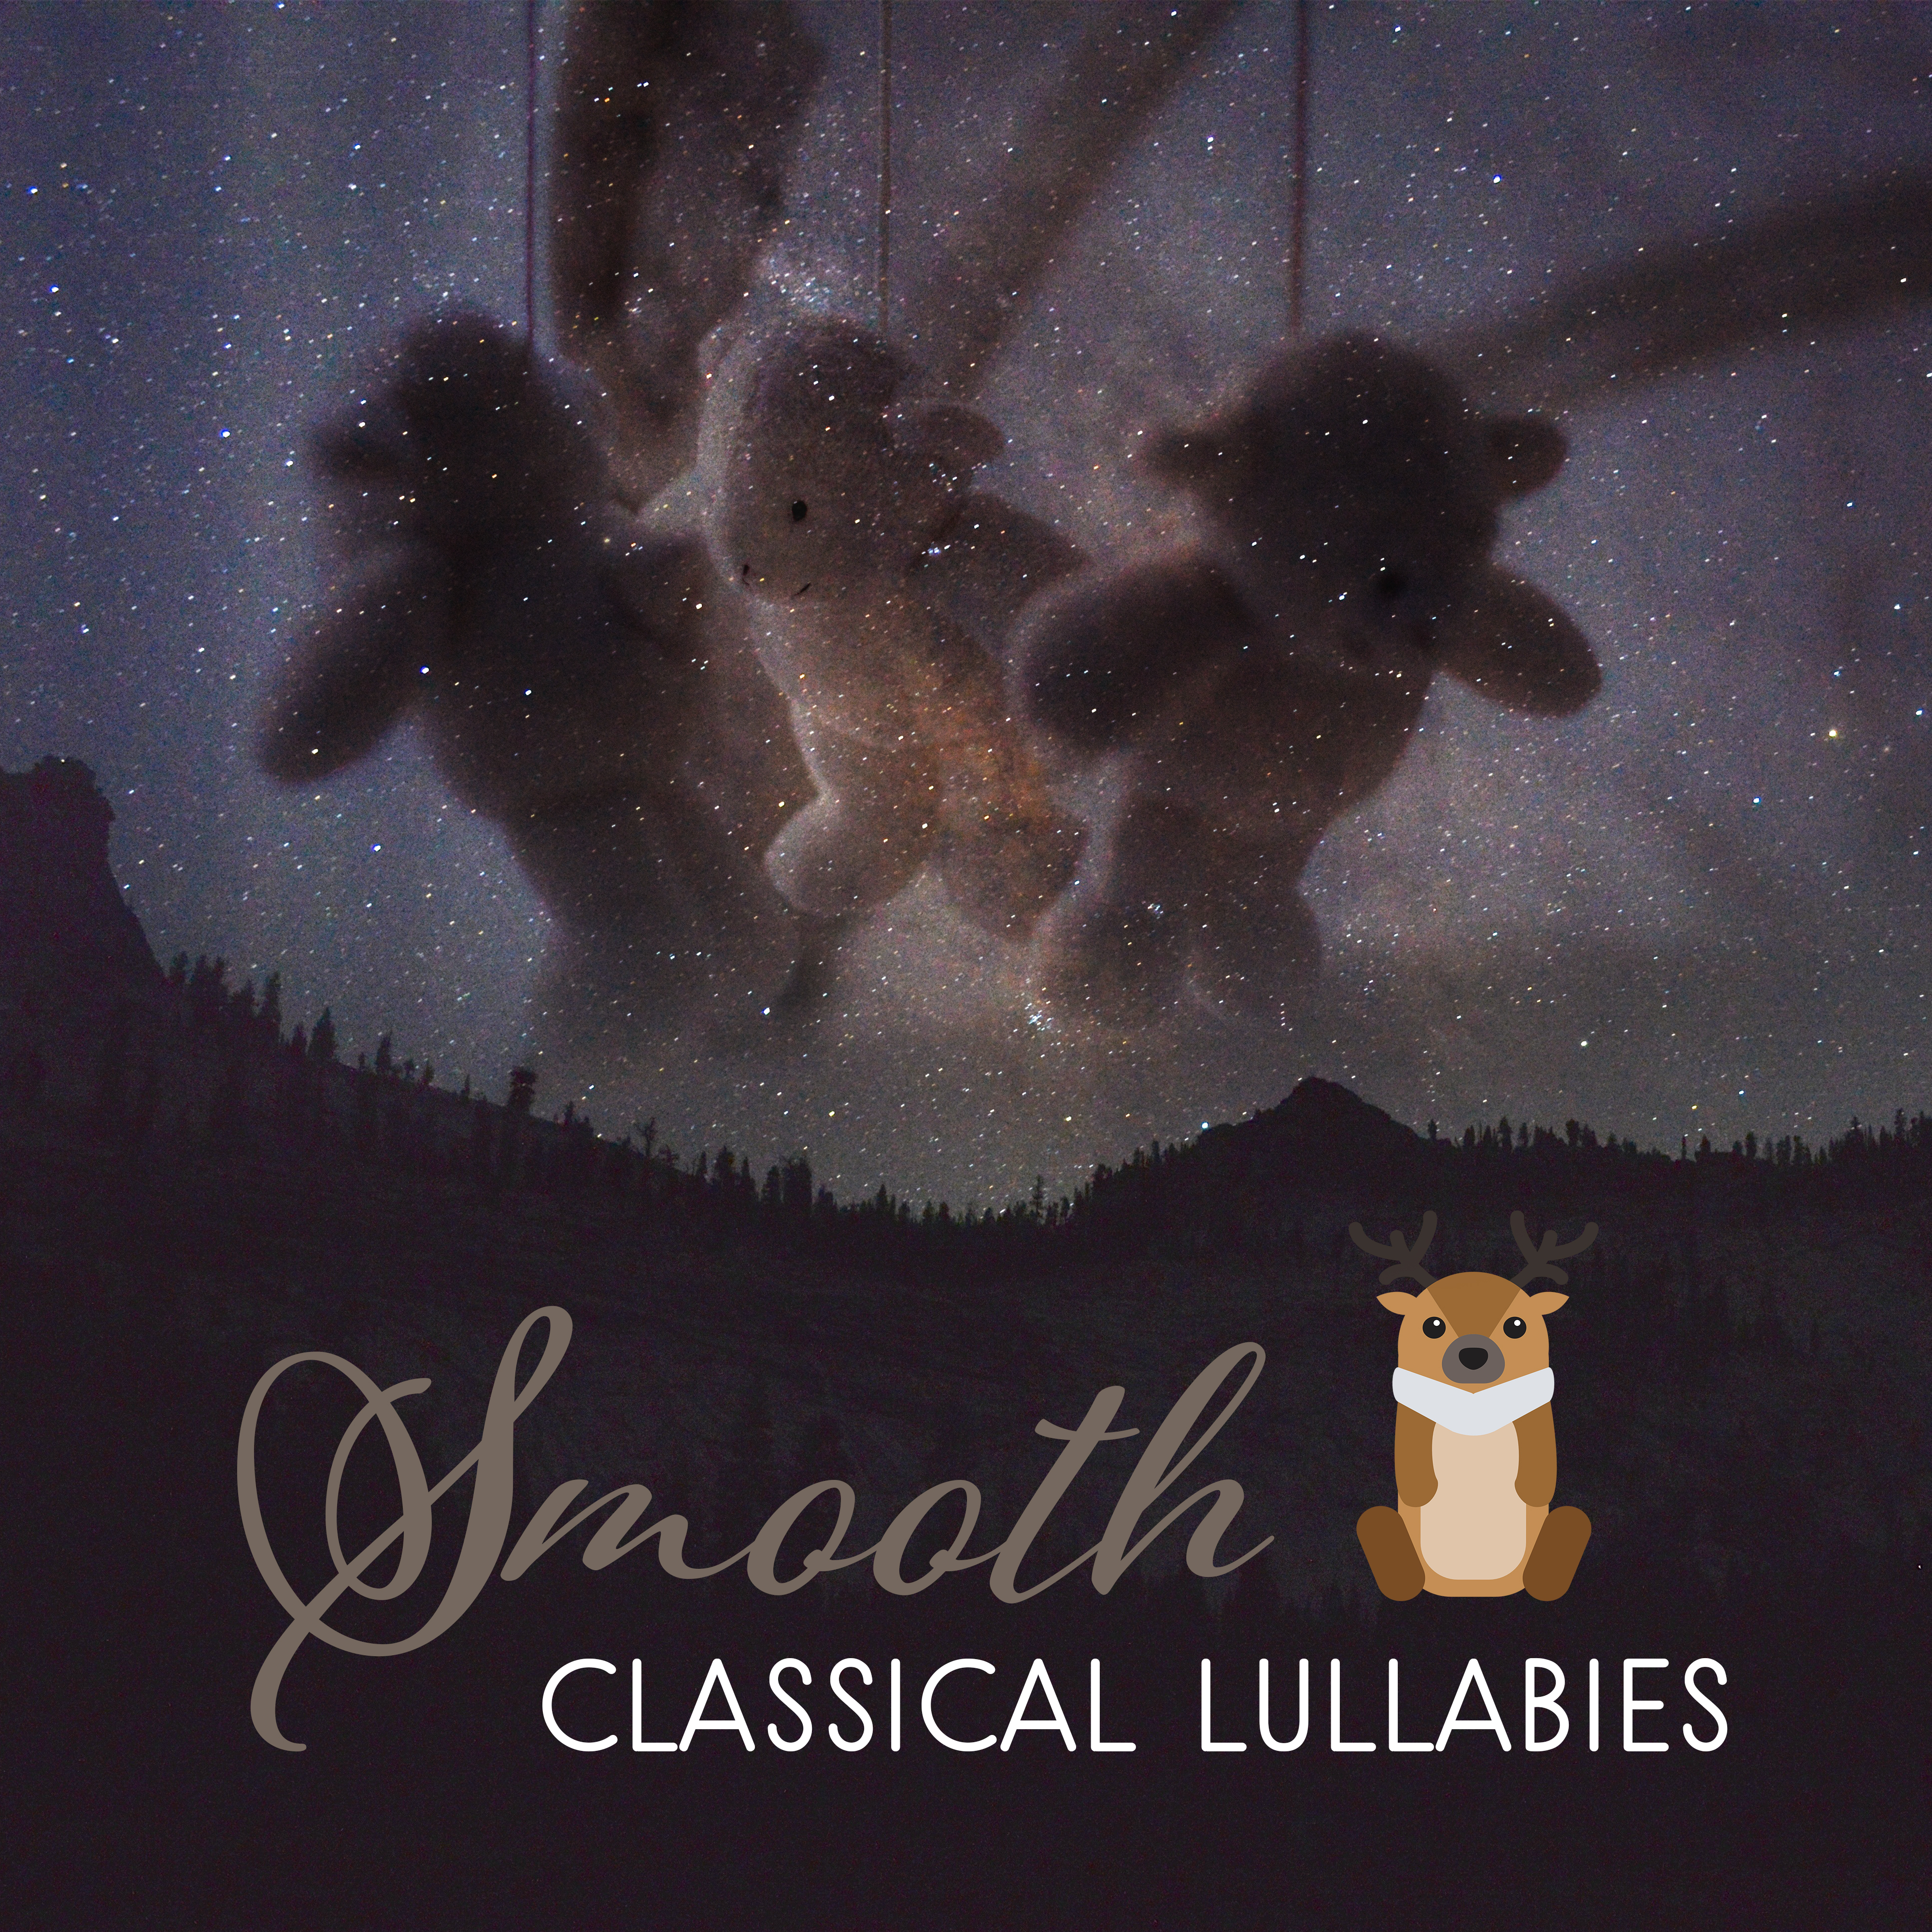 Smooth Classical Lullabies – Amazing Classical Music, Ambient Rest, Bedtime Music, Sweet Songs